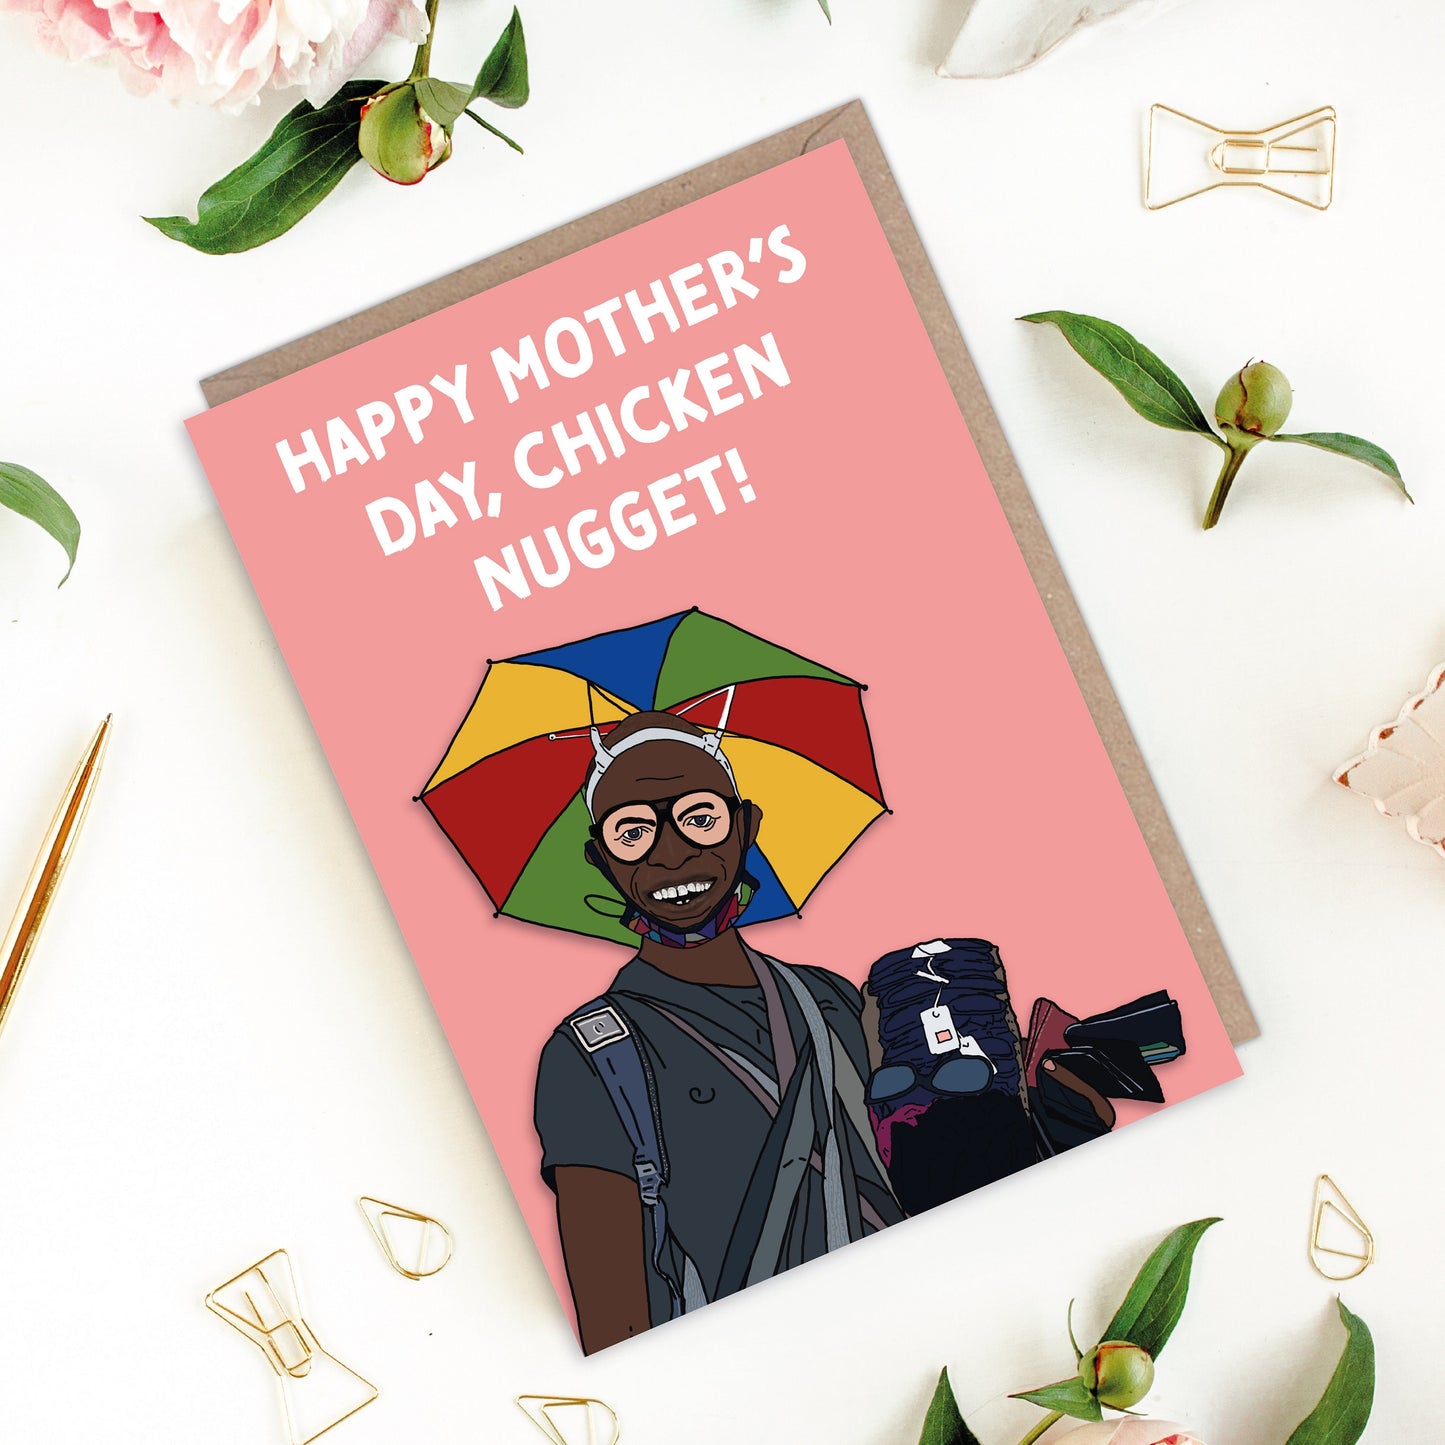 Happy Mother's Day Chicken Nugget Card